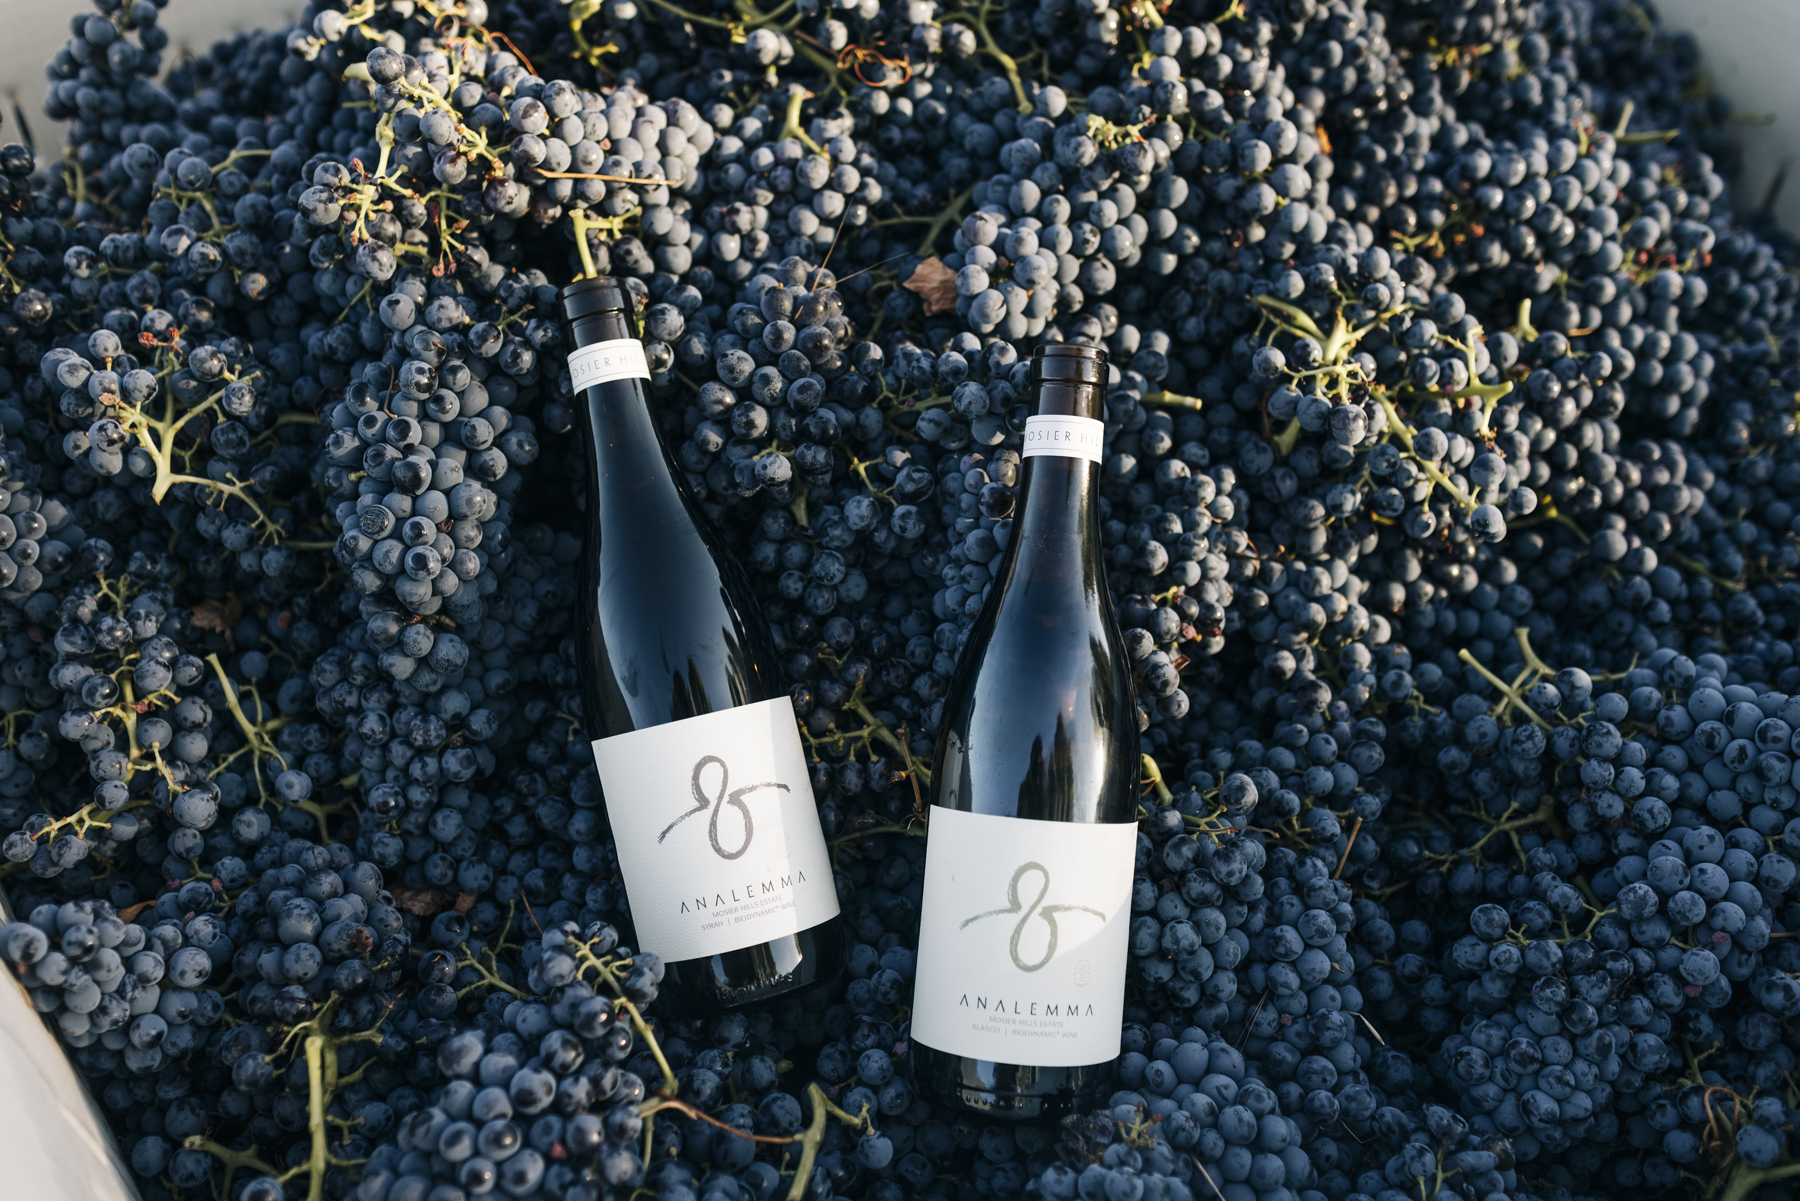 Analemma bottles laying on just harvest red grapes